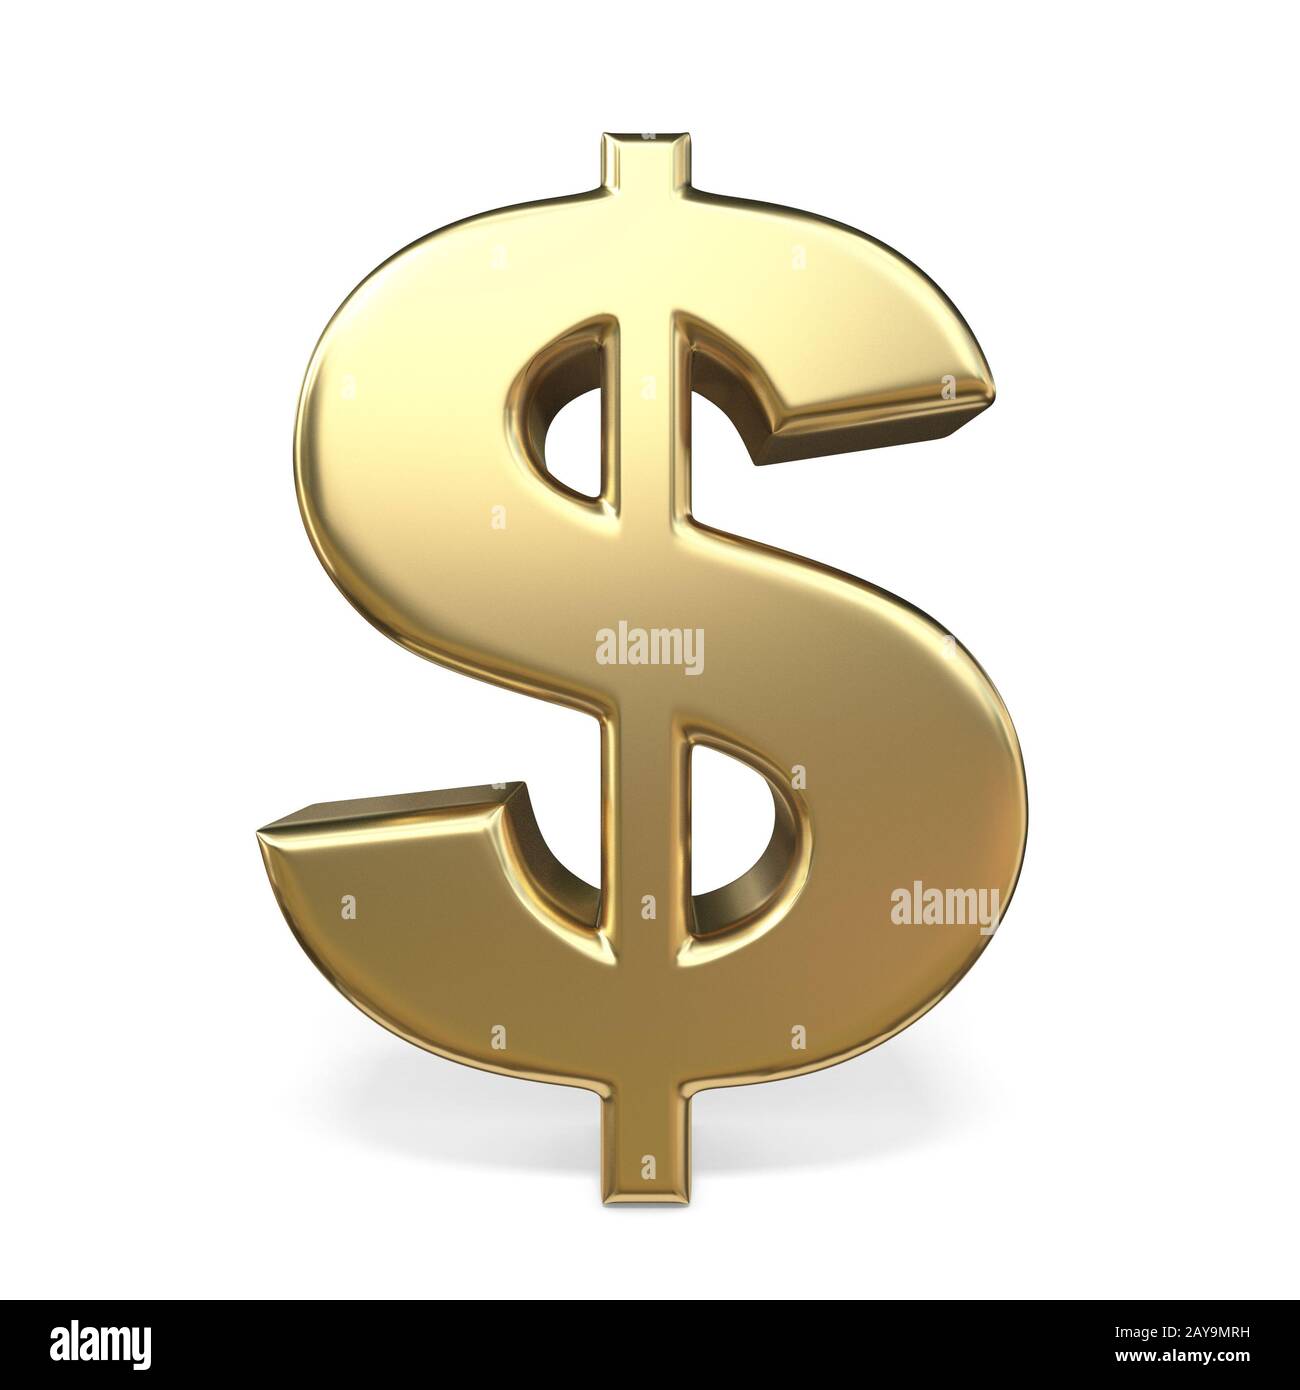 Golden currency symbol DOLLAR 3D Stock Photo